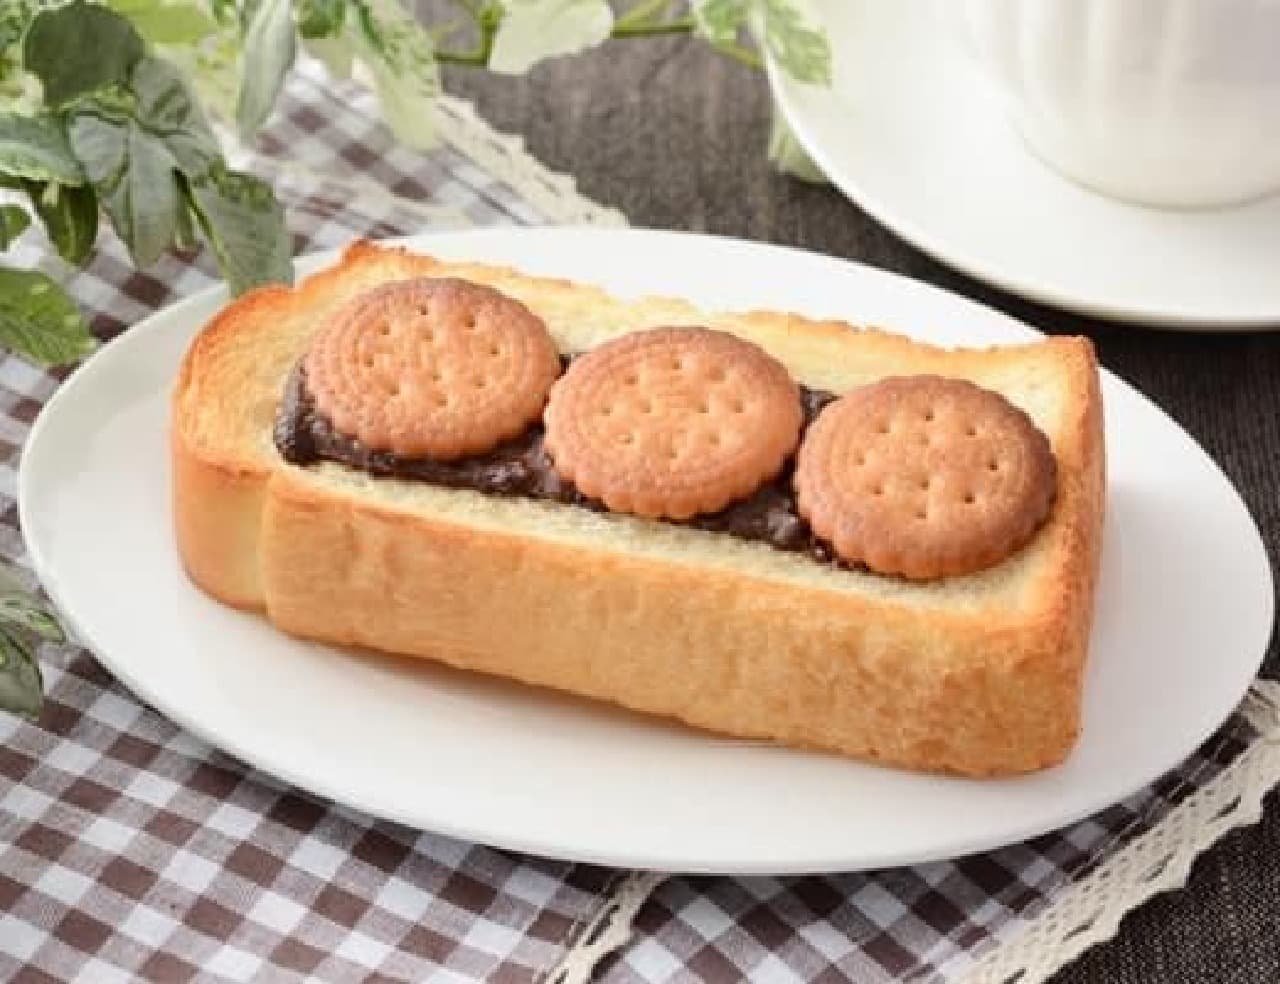 Lawson "Mille Biscuits Toast"